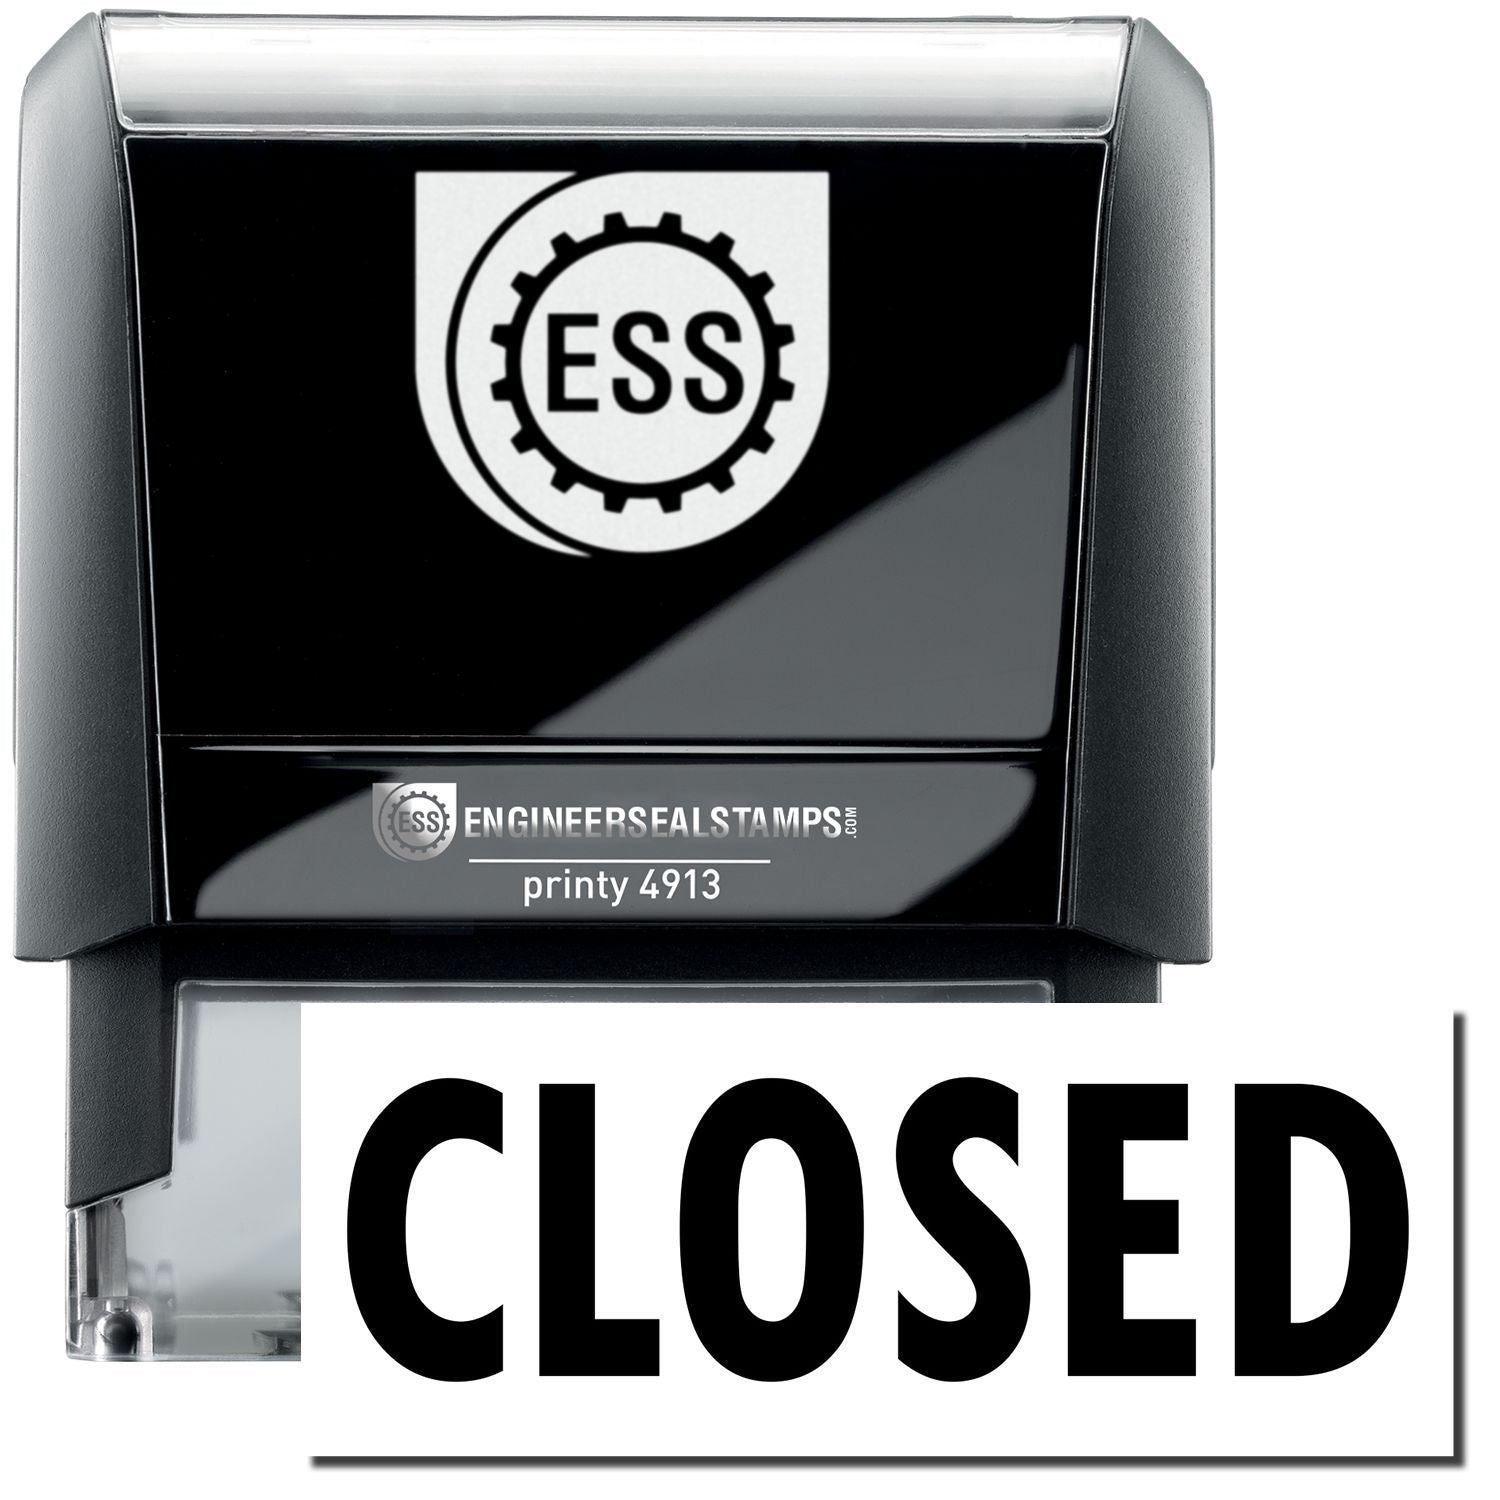 A large self-inking stamp with a stamped image showing how the text "CLOSED" in a large bold font is displayed by it.